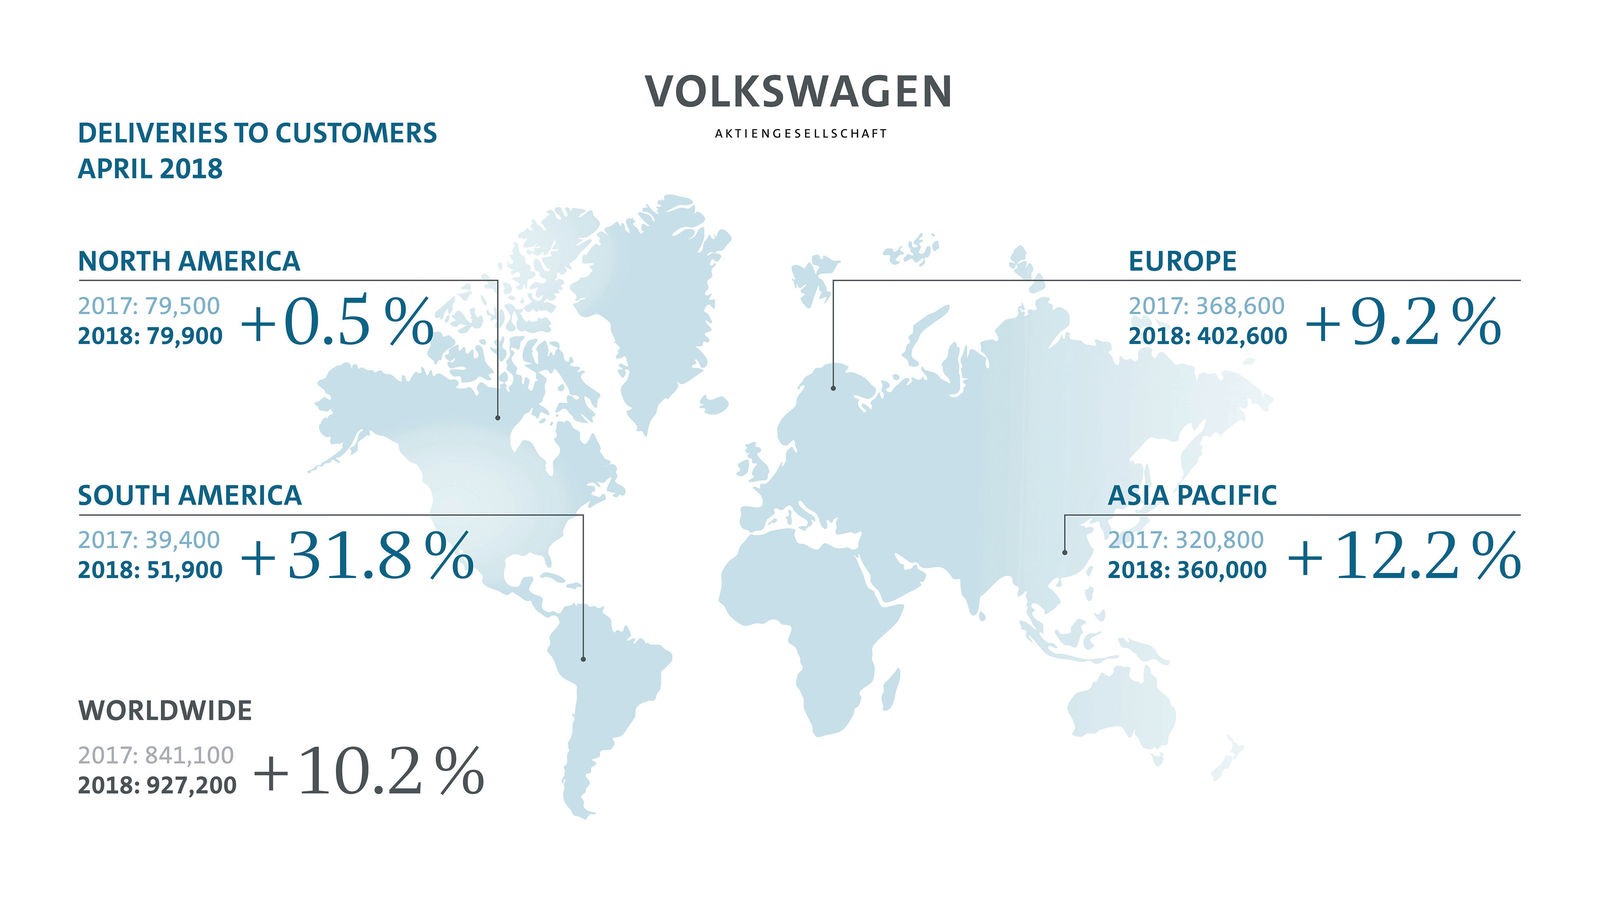 Volkswagen Group delivers more than 900,000 vehicles in April